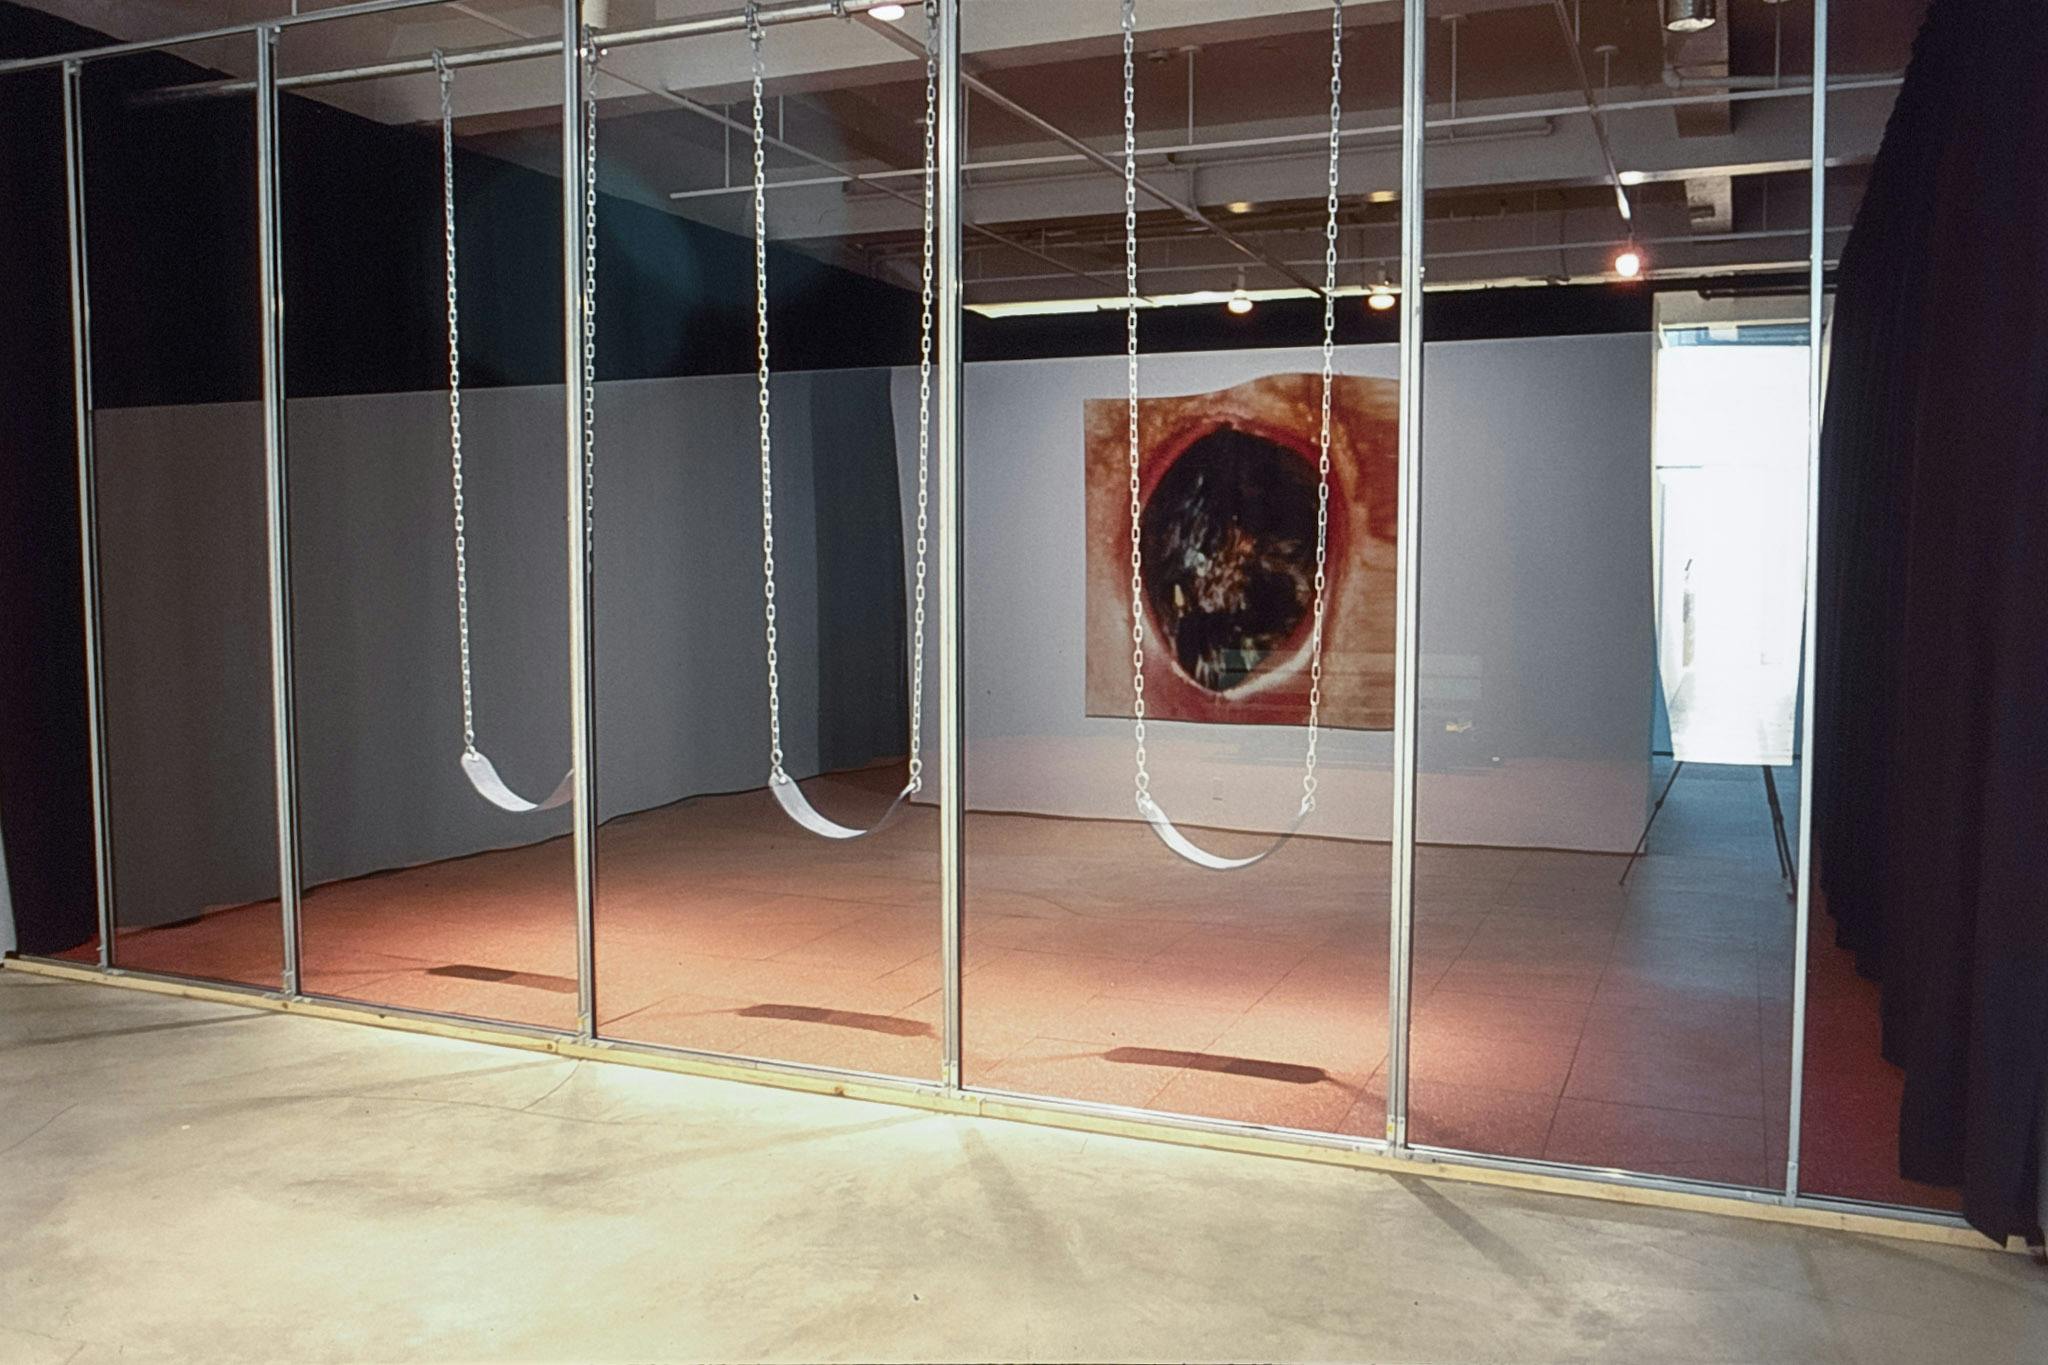 Three swings are installed right next to the glass wall in the gallery. On the white wall over the swings, a large photograph of the emerging baby's head during the birthing process is installed. 